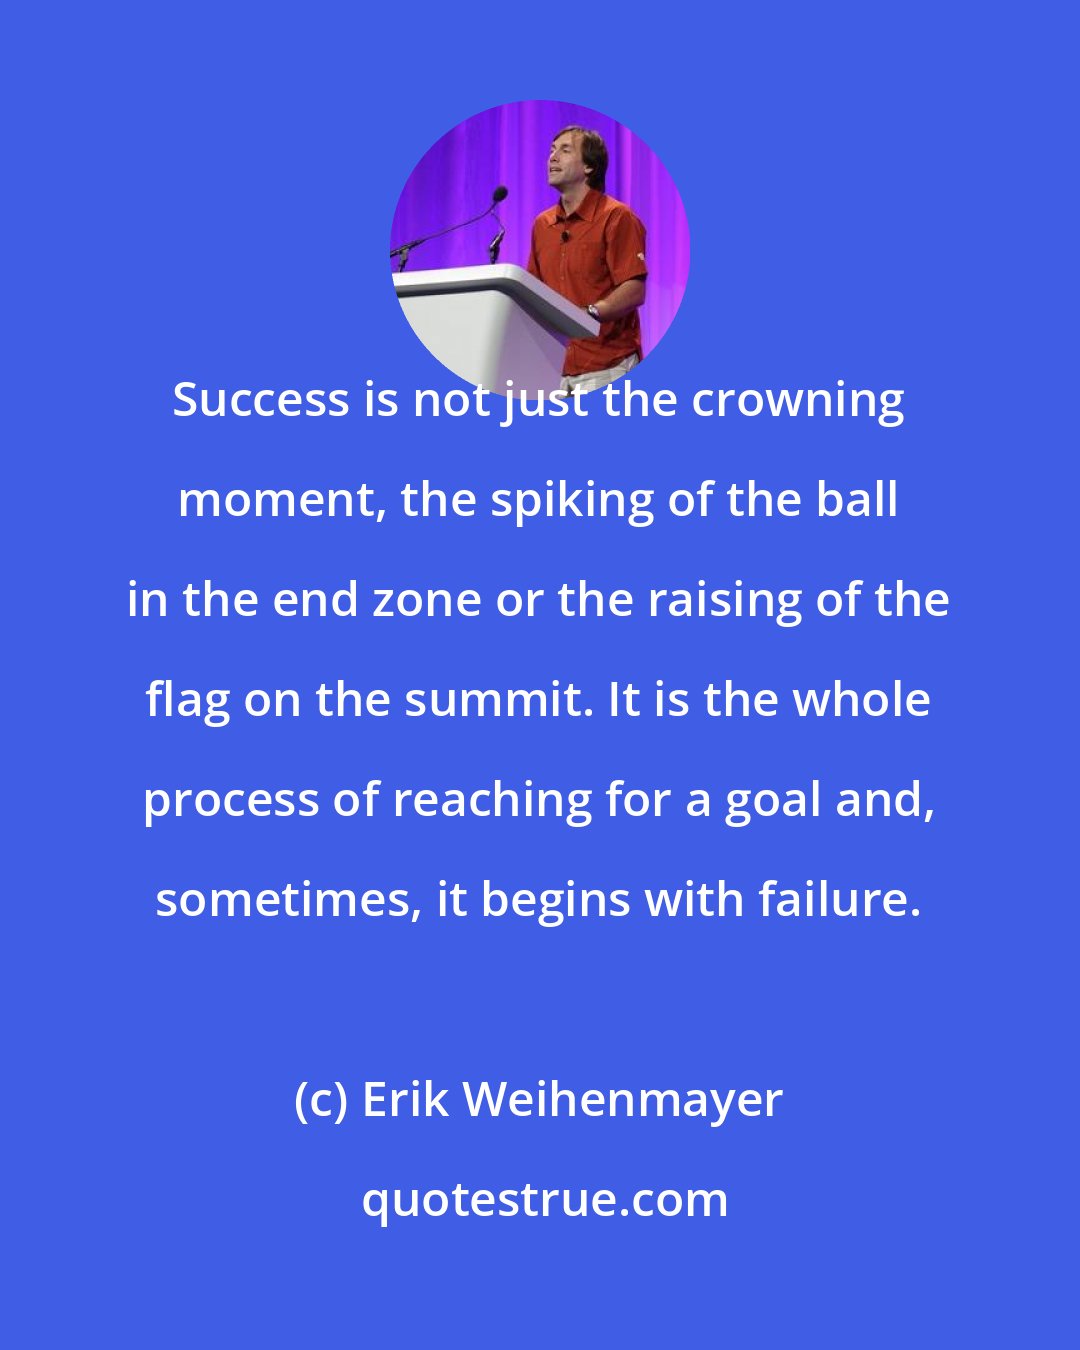 Erik Weihenmayer: Success is not just the crowning moment, the spiking of the ball in the end zone or the raising of the flag on the summit. It is the whole process of reaching for a goal and, sometimes, it begins with failure.